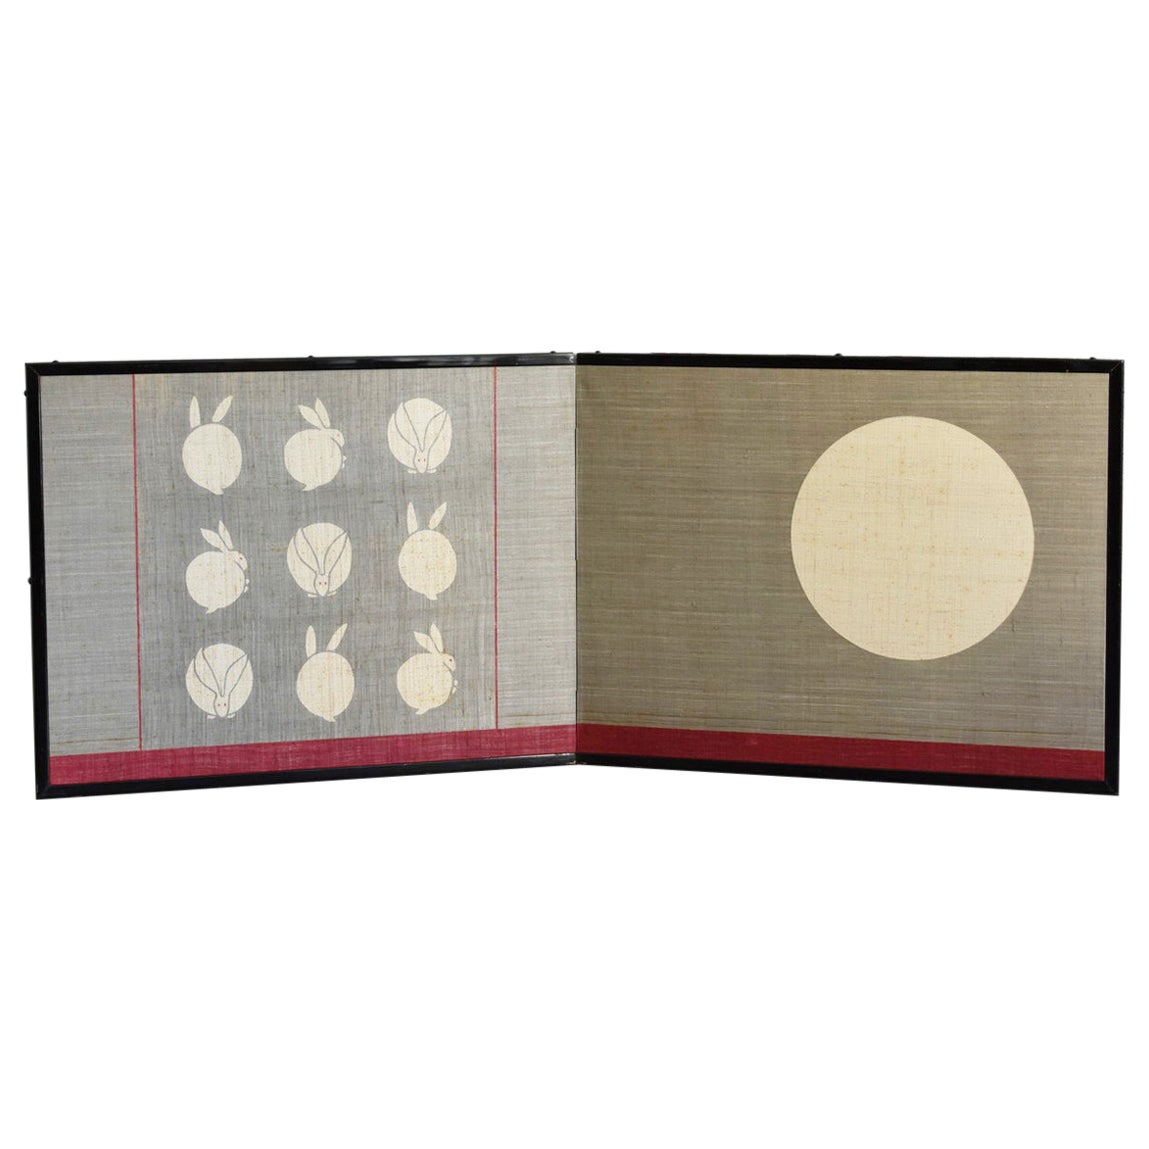 Japanese Folding Screen with Moon and Rabbit Drawn on Cloth/Old Partition/20th